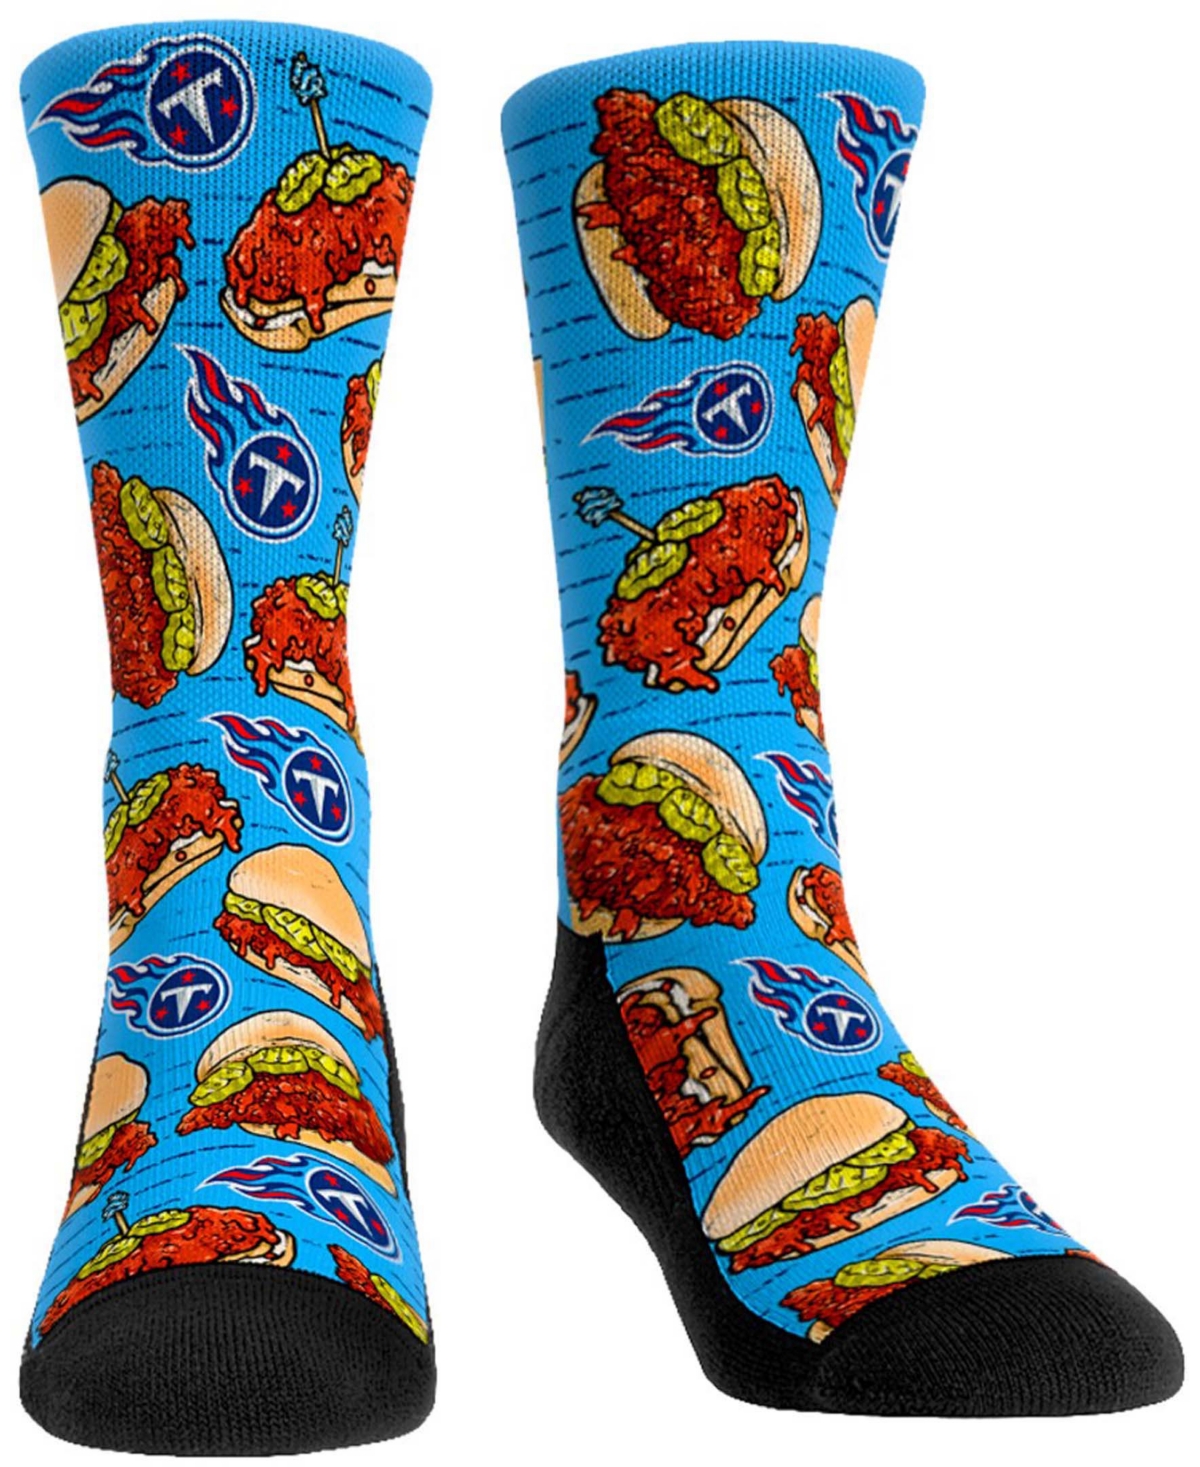 Rock 'em Men's And Women's Tennessee Titans Localized Food Multi Crew Socks